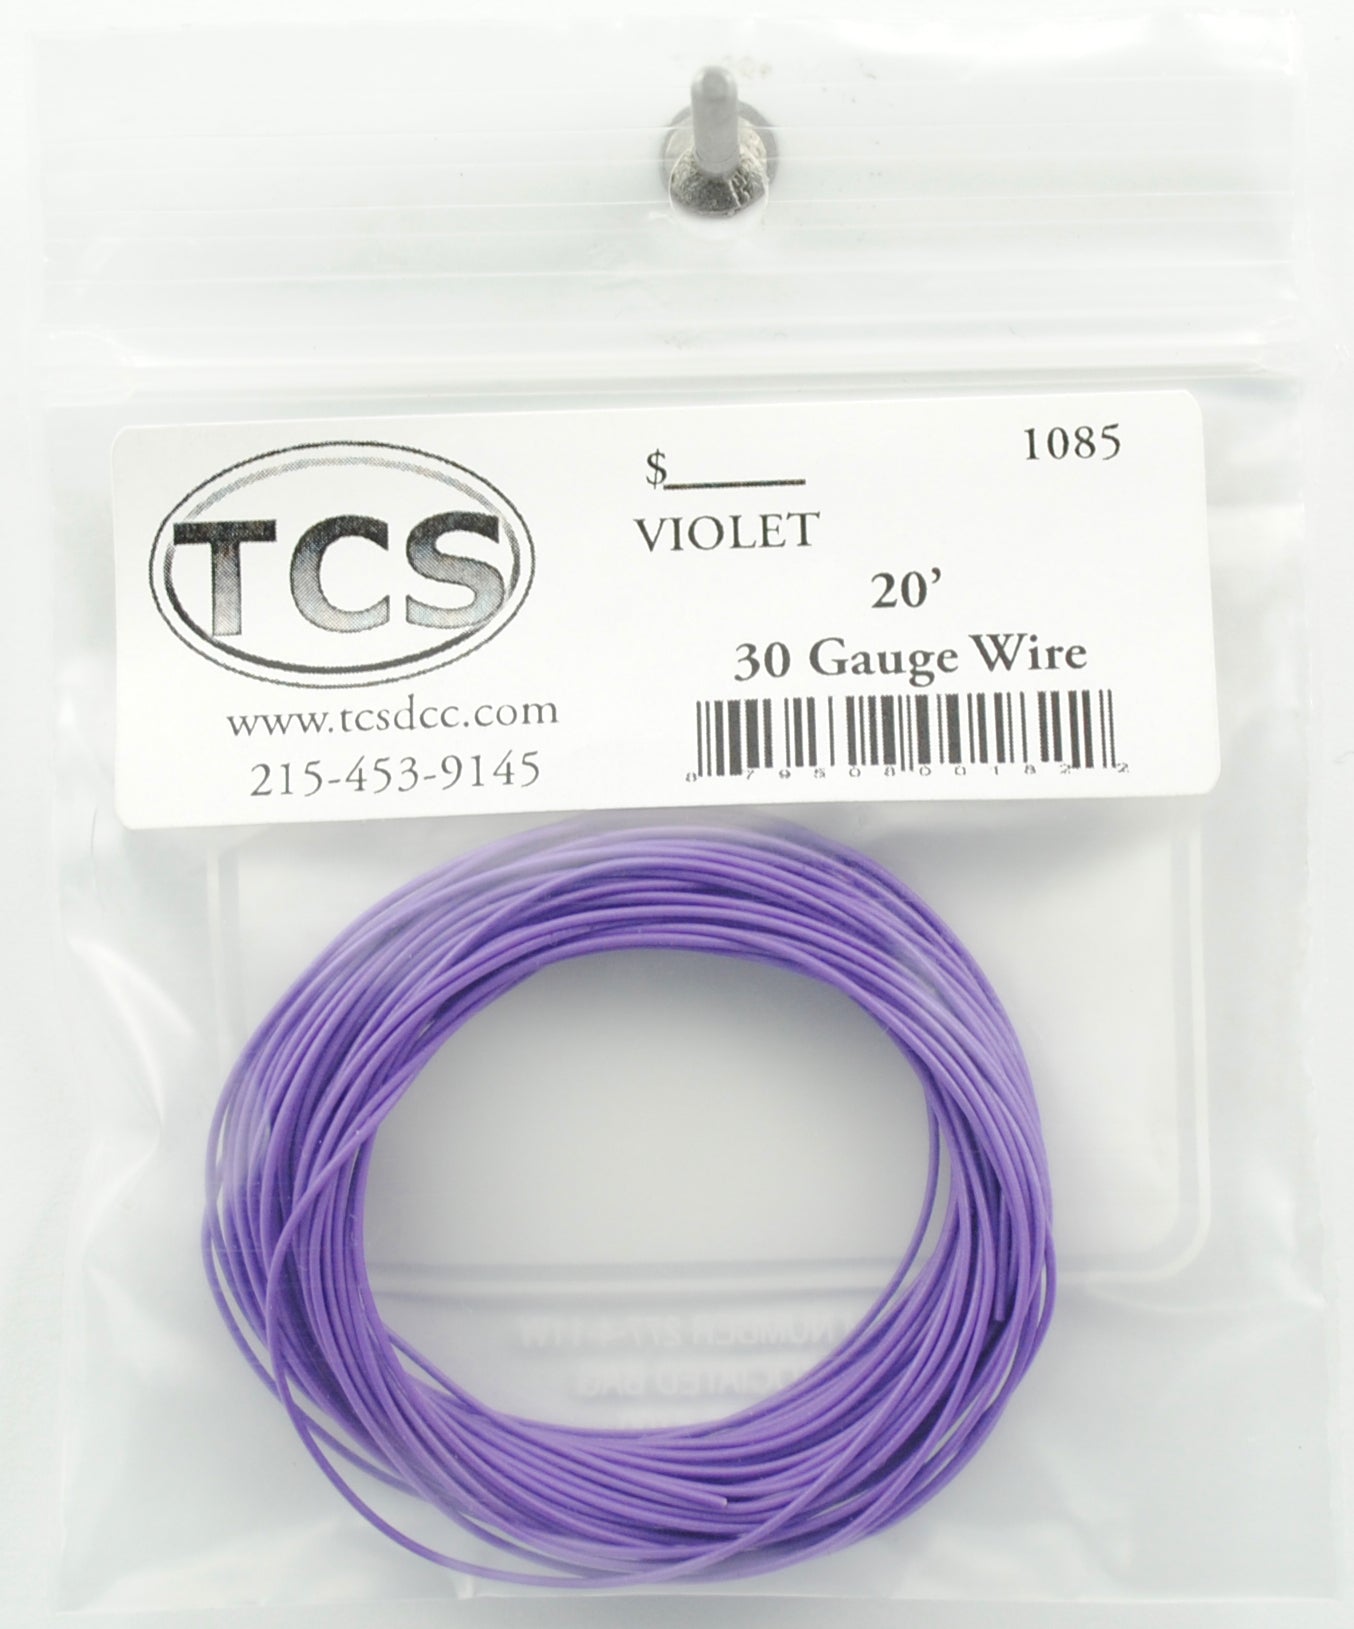 Train Control Systems 1085 Violet 20' of 30 Gauge Wire